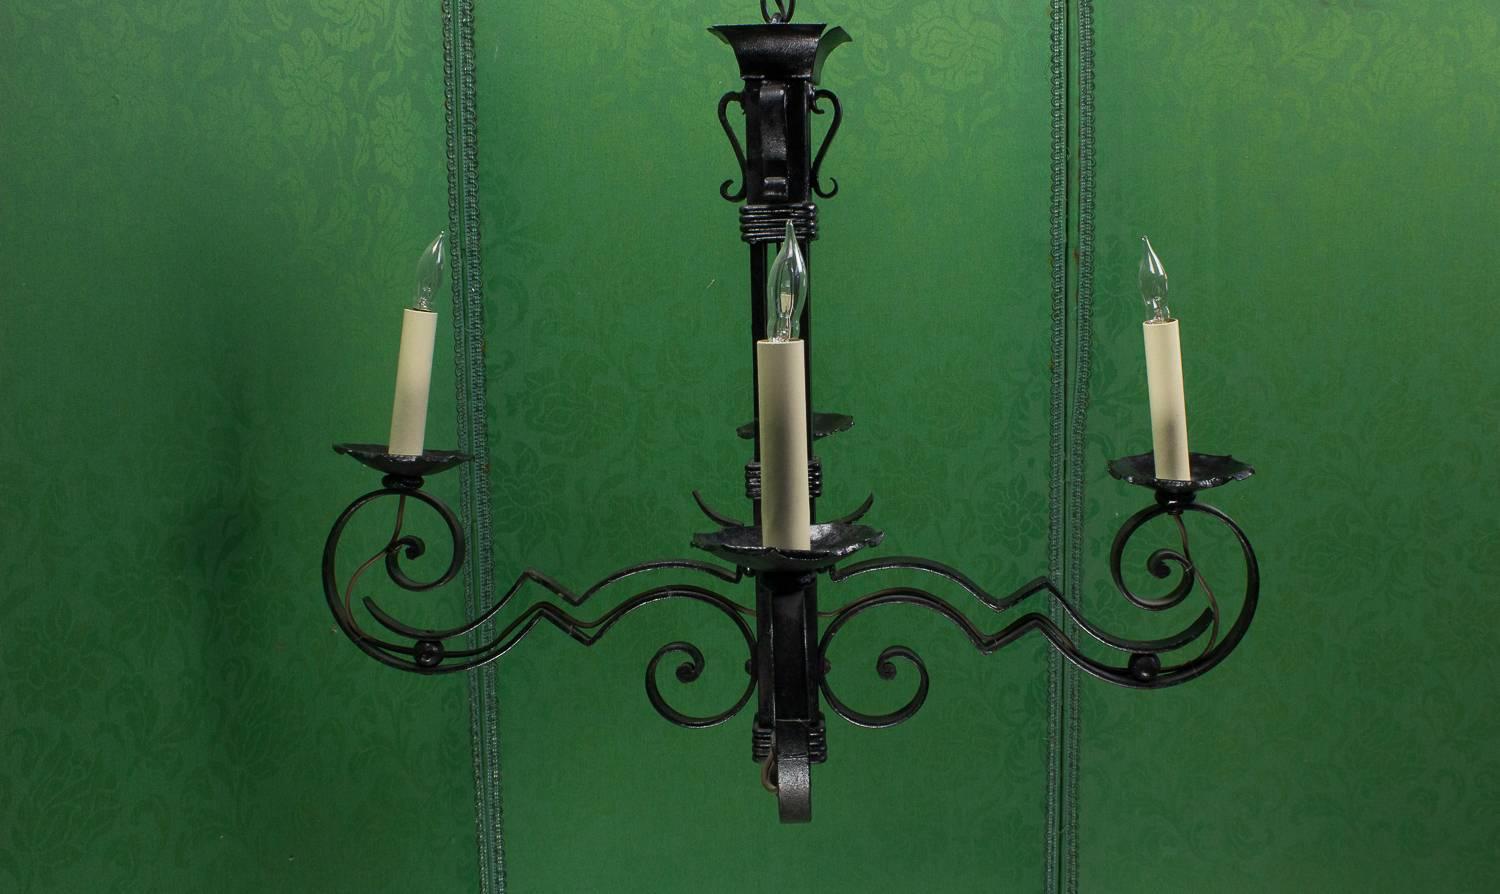 This French 1930s black iron chandelier is a unique piece that is sure to become the centerpiece of any room. Crafted in an Art Deco style, the chandelier boasts delicate intricate scrolled iron detailing, showcasing the craftsmanship and attention